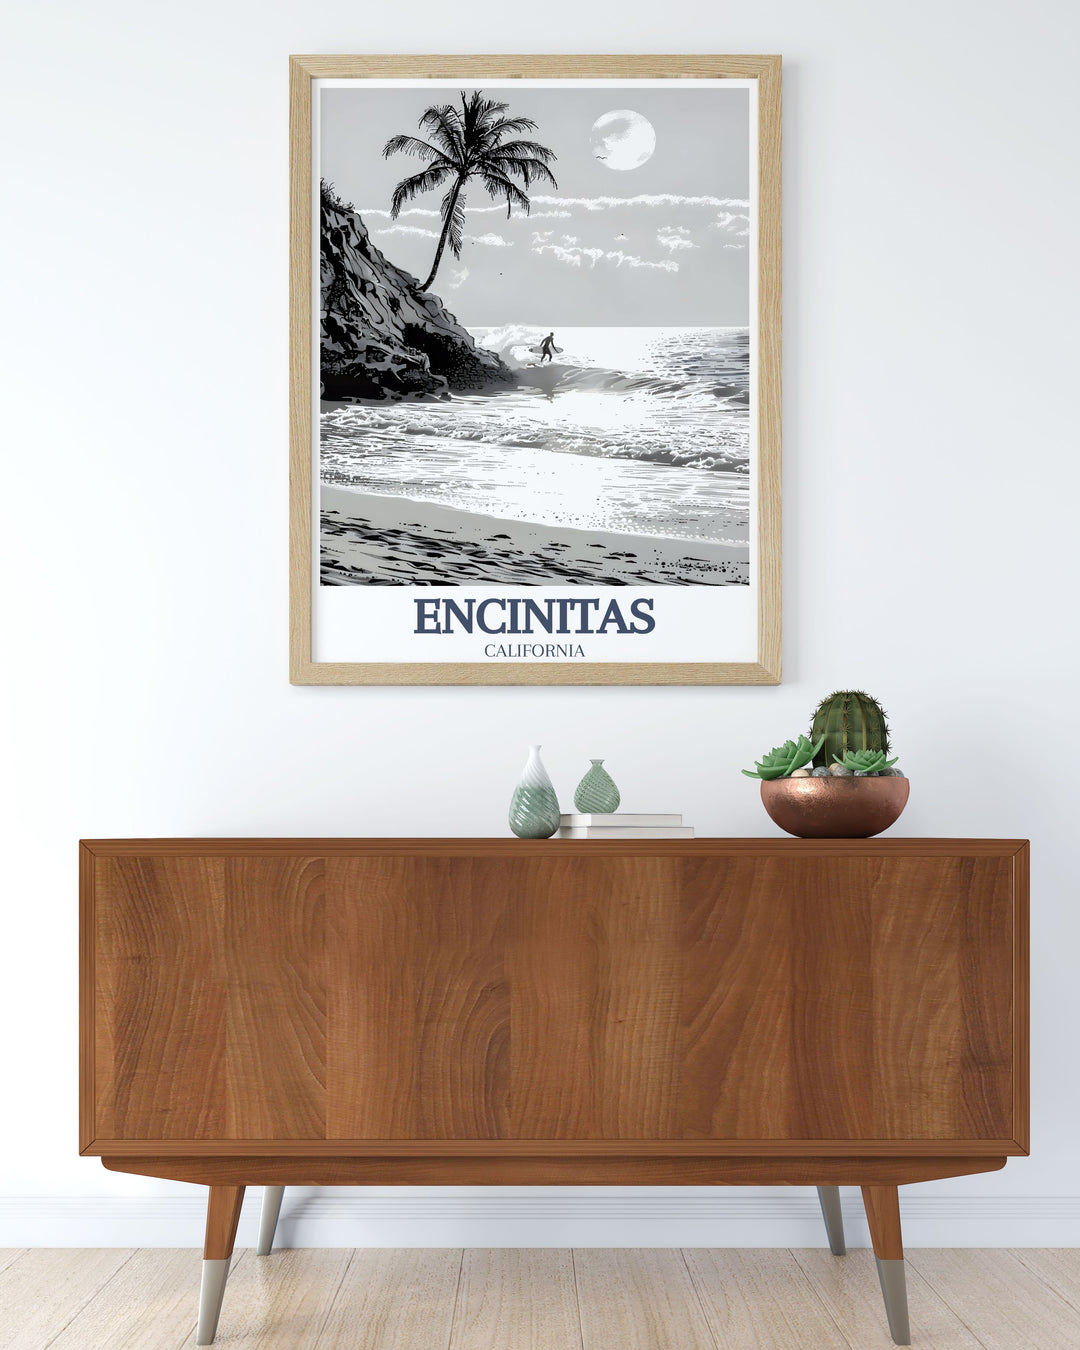 Stunning prints of Moonlight Beach, Swamis Surf Spot capturing the dynamic spirit of Encinitas Beach perfect for personalized gifts and travel poster prints unique artwork for home decor and beach enthusiasts